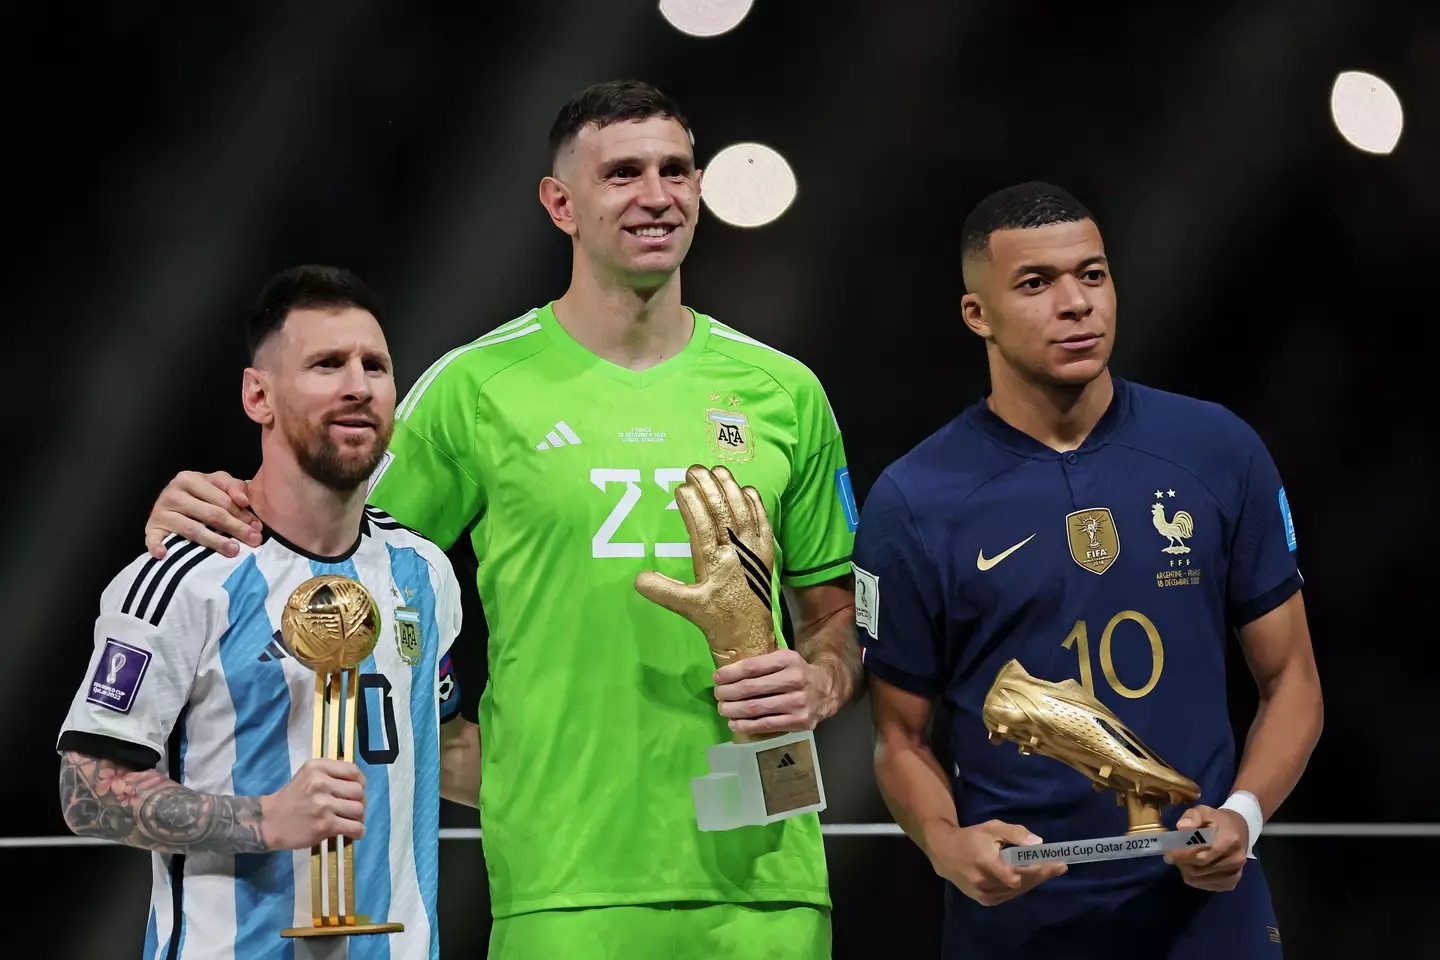 Messi, Martinez and Mbappe after winning the Golden Ball, Golden Glove and Golden Boot. (Image